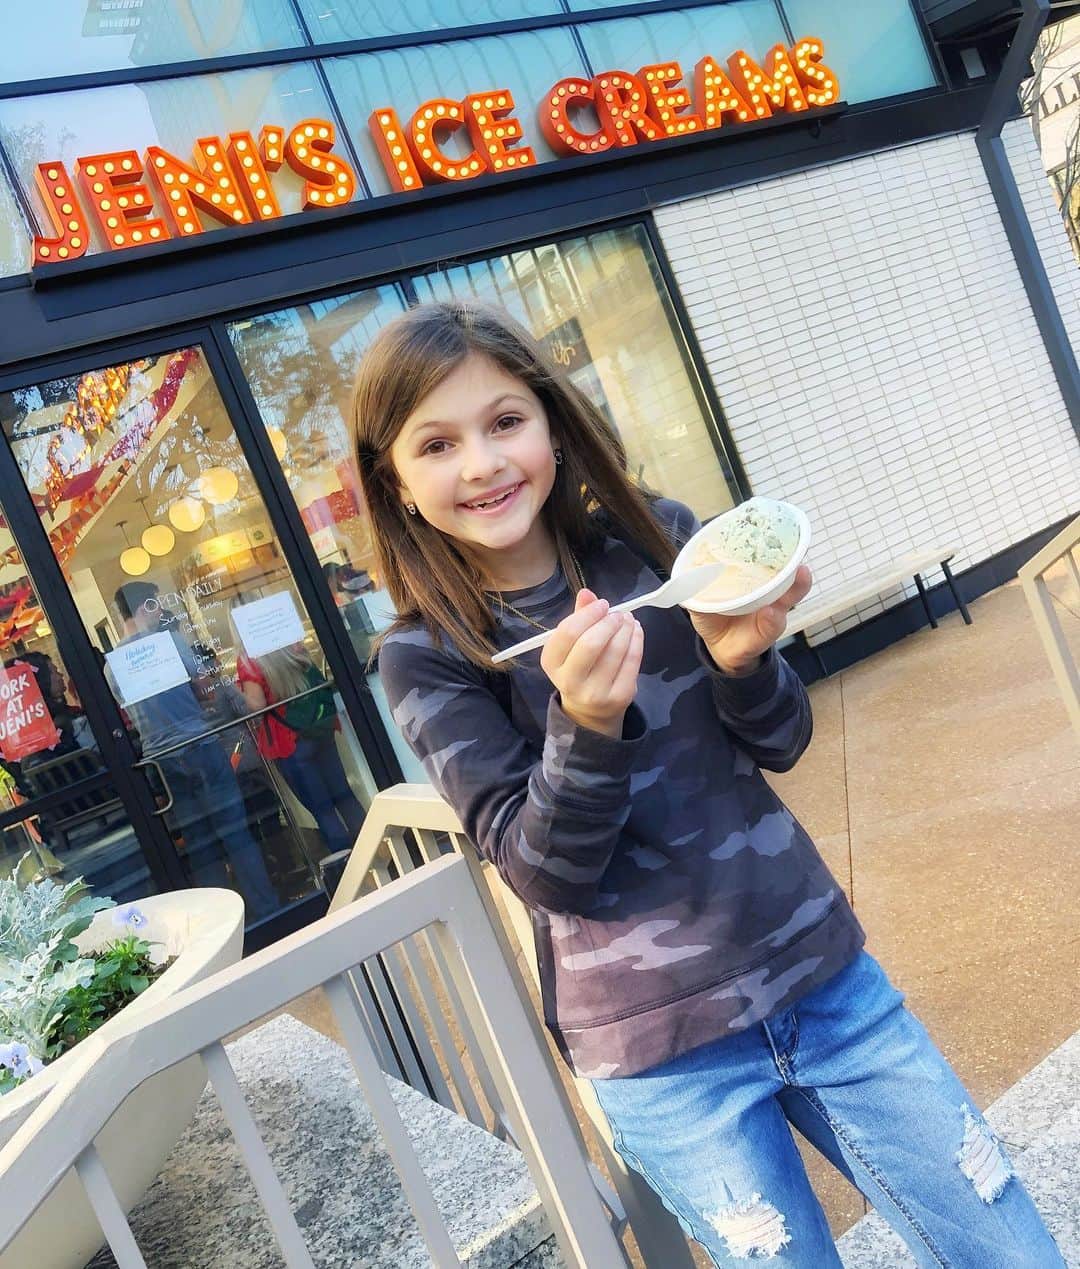 Angie Keiserのインスタグラム：「This was her 10th birthday lunch. As Cincinnati natives, Graeter’s was always our #1, but we’re now officially team @jenisicecreams 🧡 Sydneys favorite combo is green mint chip + coffee with cream and sugar 😋  And because we always get a lot of allergy questions when we post about ice cream shops, here’s how we approach it:  1. We KNOW there is always a risk of cross contamination. Period. There is. 2. We research before we go. I adore jeni’s for a million reasons but listing the allergens right on all the flavor cards makes me feel like they care 🧡 3. We go during non-peak times. Because if I have questions, I don’t want to slow them down from taking care of a long line of people. 4. We ask questions. We tell them about the allergies. And we ask if it’s possible to use a freshly cleaned scooper to minimize the risk of cross contamination. 4. We ask everything with genuine respect and a smile. We find that when we give it, 9 times out of 10, we get it back. 5. If we have any hesitation AT ALL, we walk. 6. We never ever go without epinephrine. Ever. If we ever realized we didn’t have it, we wouldn’t order. Period.  Hope that helps! Now tell us, what your favorite ice cream is 🍦」